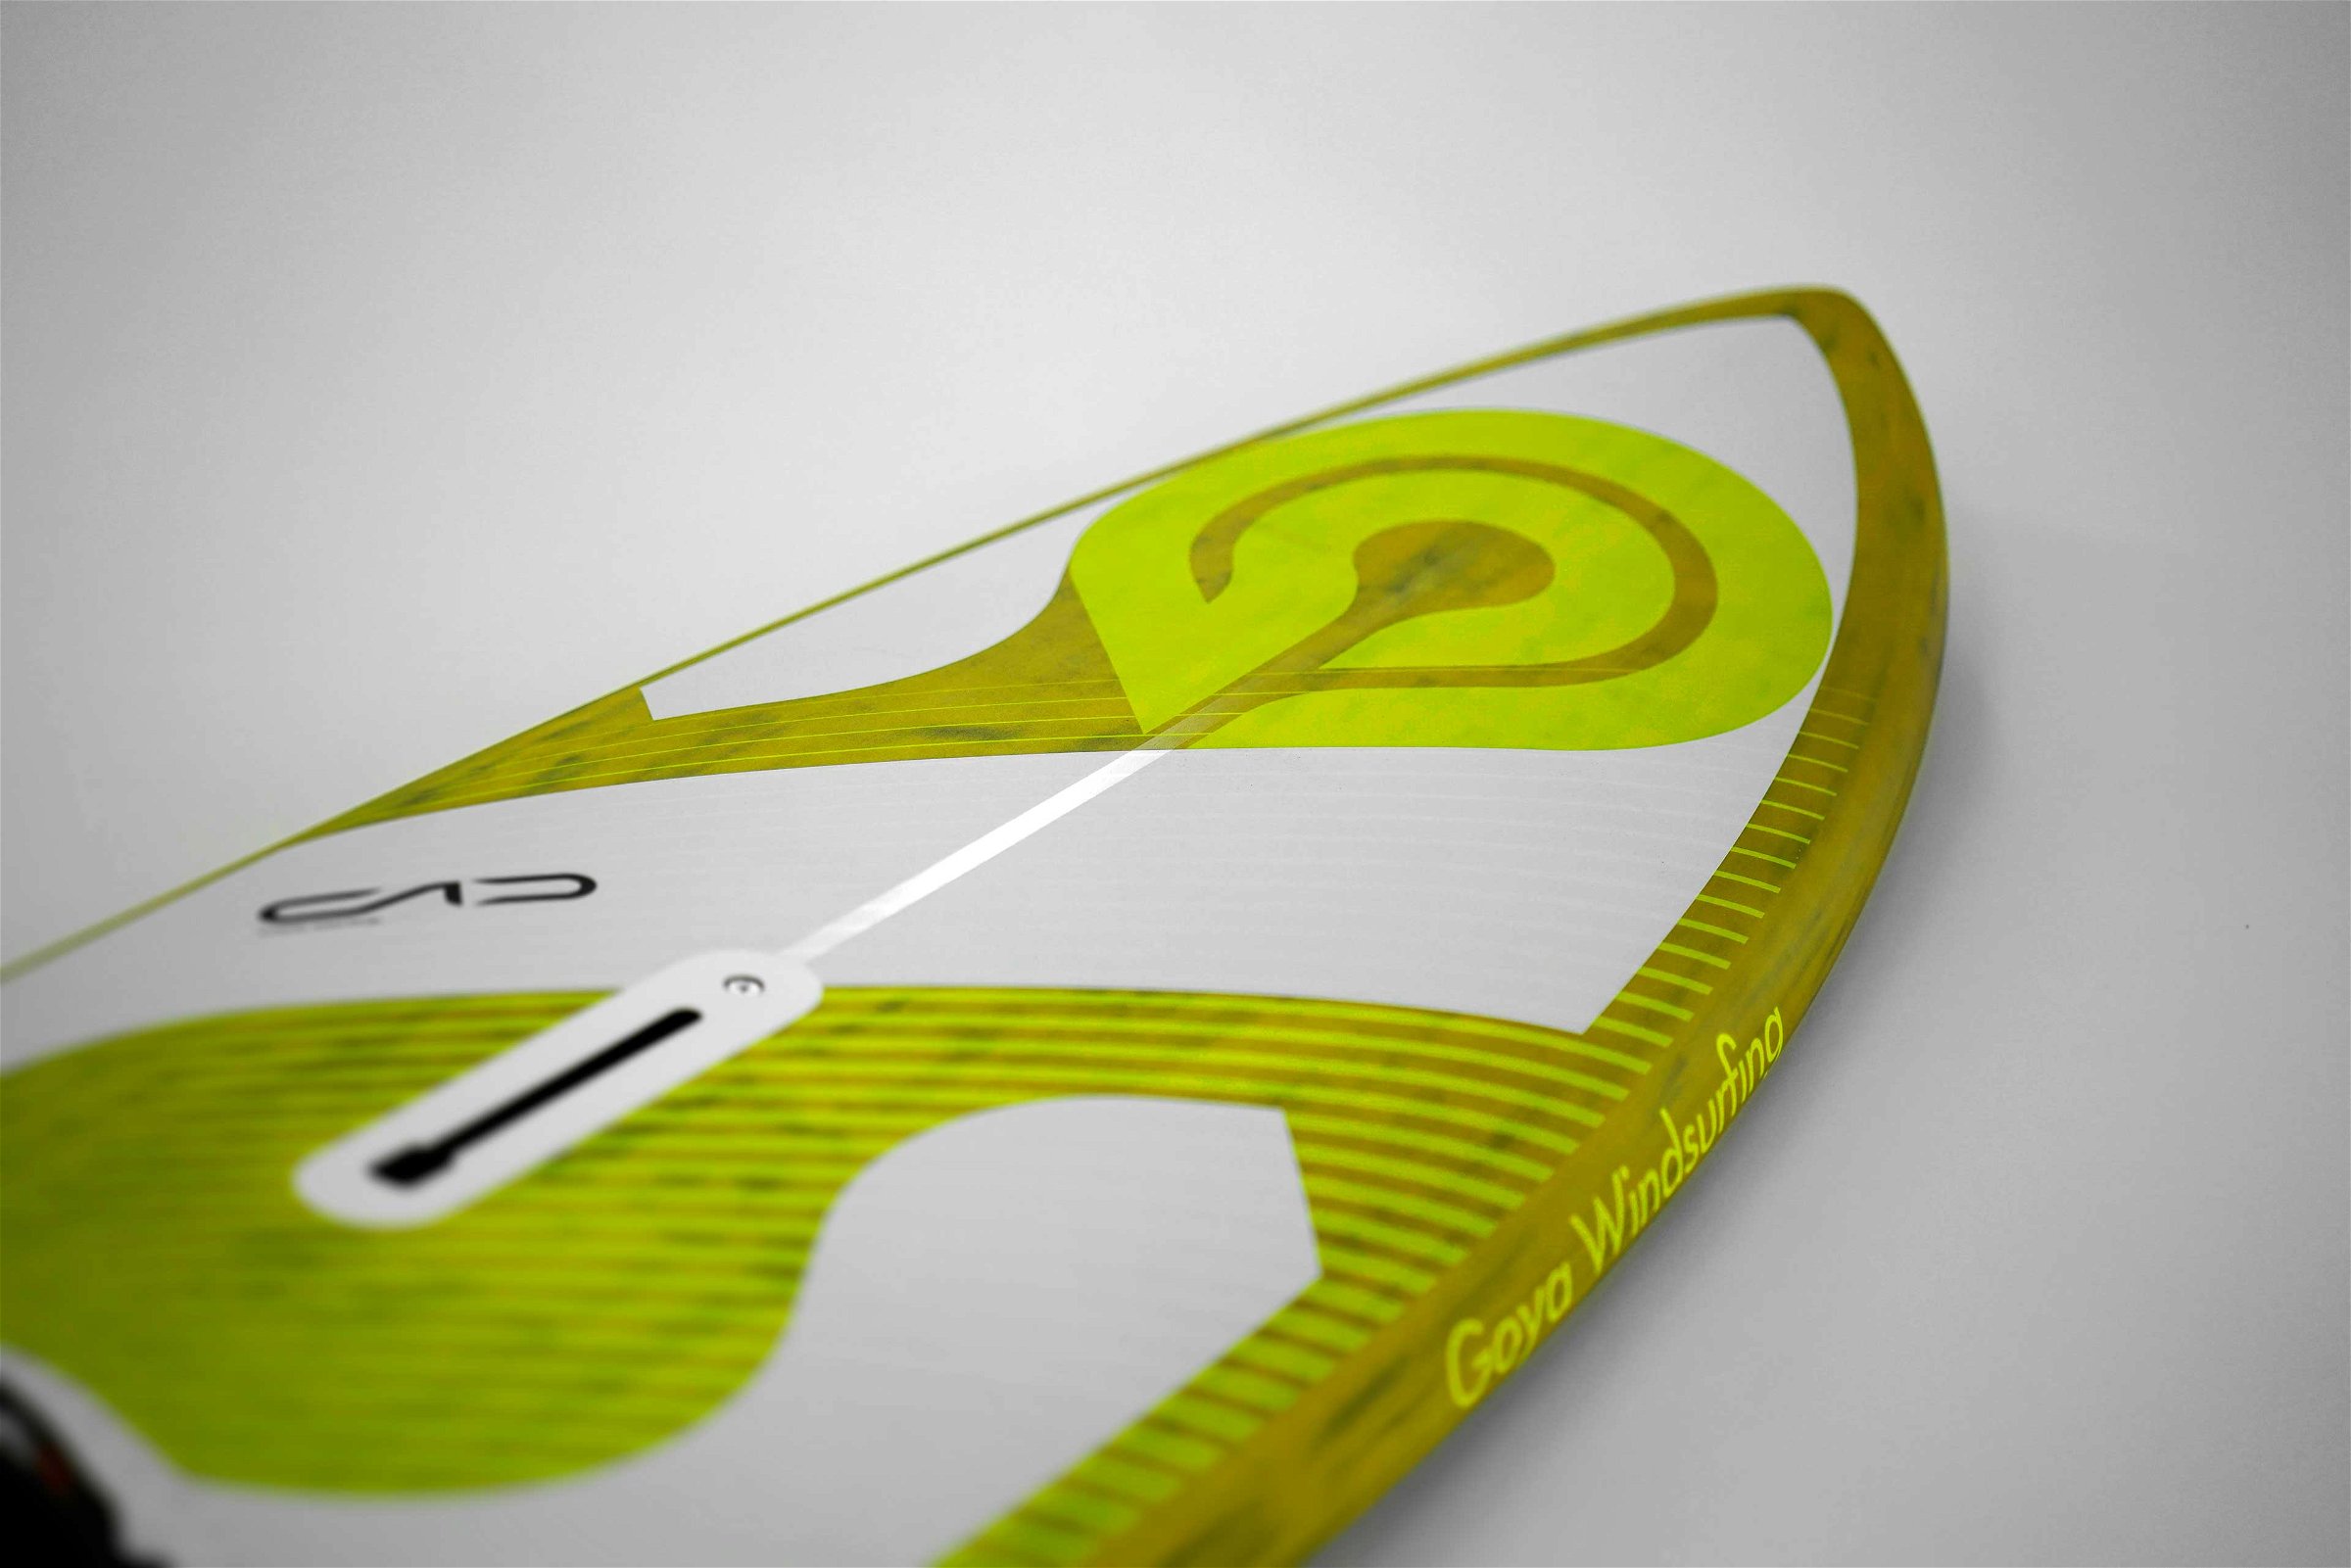 CONCEPT X Footstrap FREESTYLE WAVE PRO Fußschlaufe 